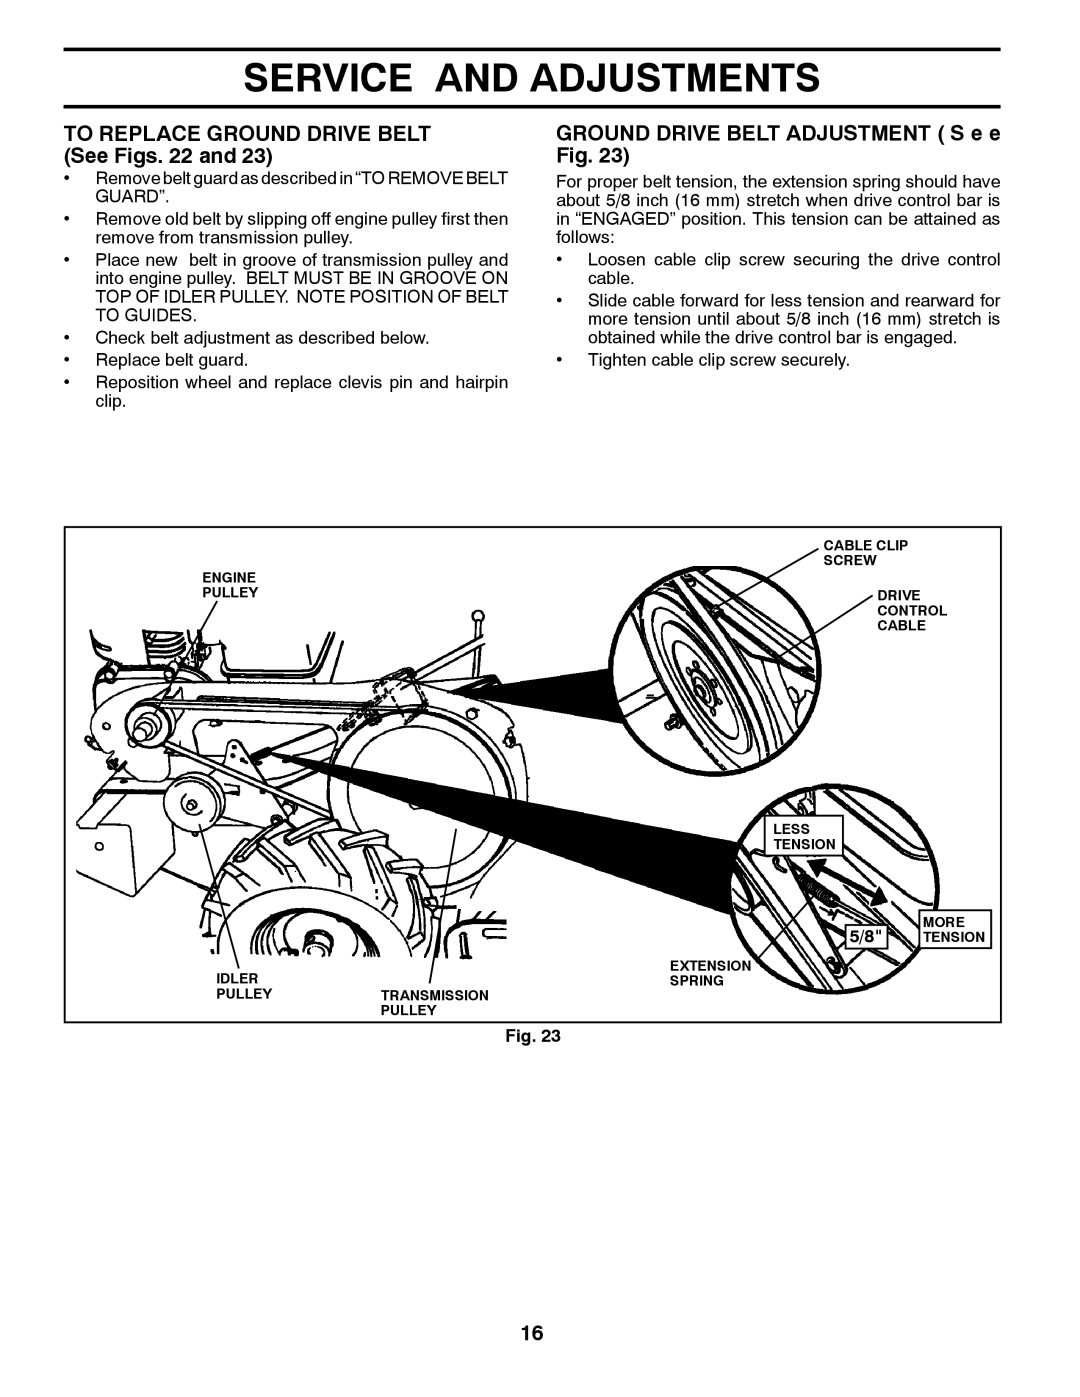 Husqvarna RTT900 owner manual TO REPLACE GROUND DRIVE BELT See Figs. 22 and, GROUND DRIVE BELT ADJUSTMENT S e e Fig 